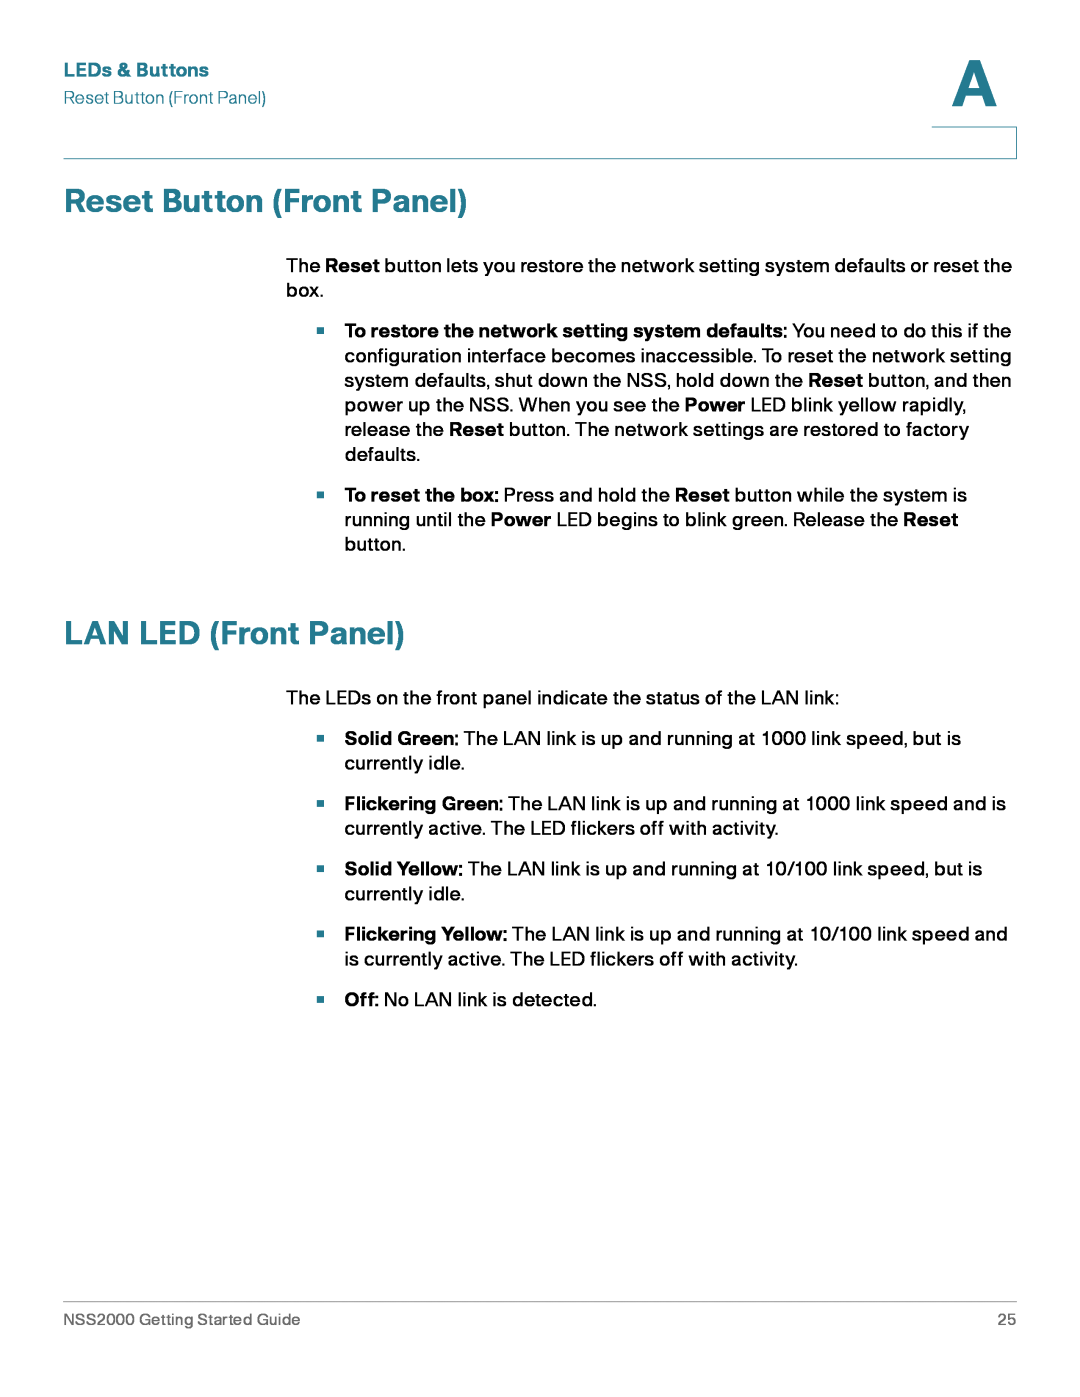 Cisco Systems NSS2000 Series manual Reset Button Front Panel, LAN LED Front Panel, LEDs & Buttons 